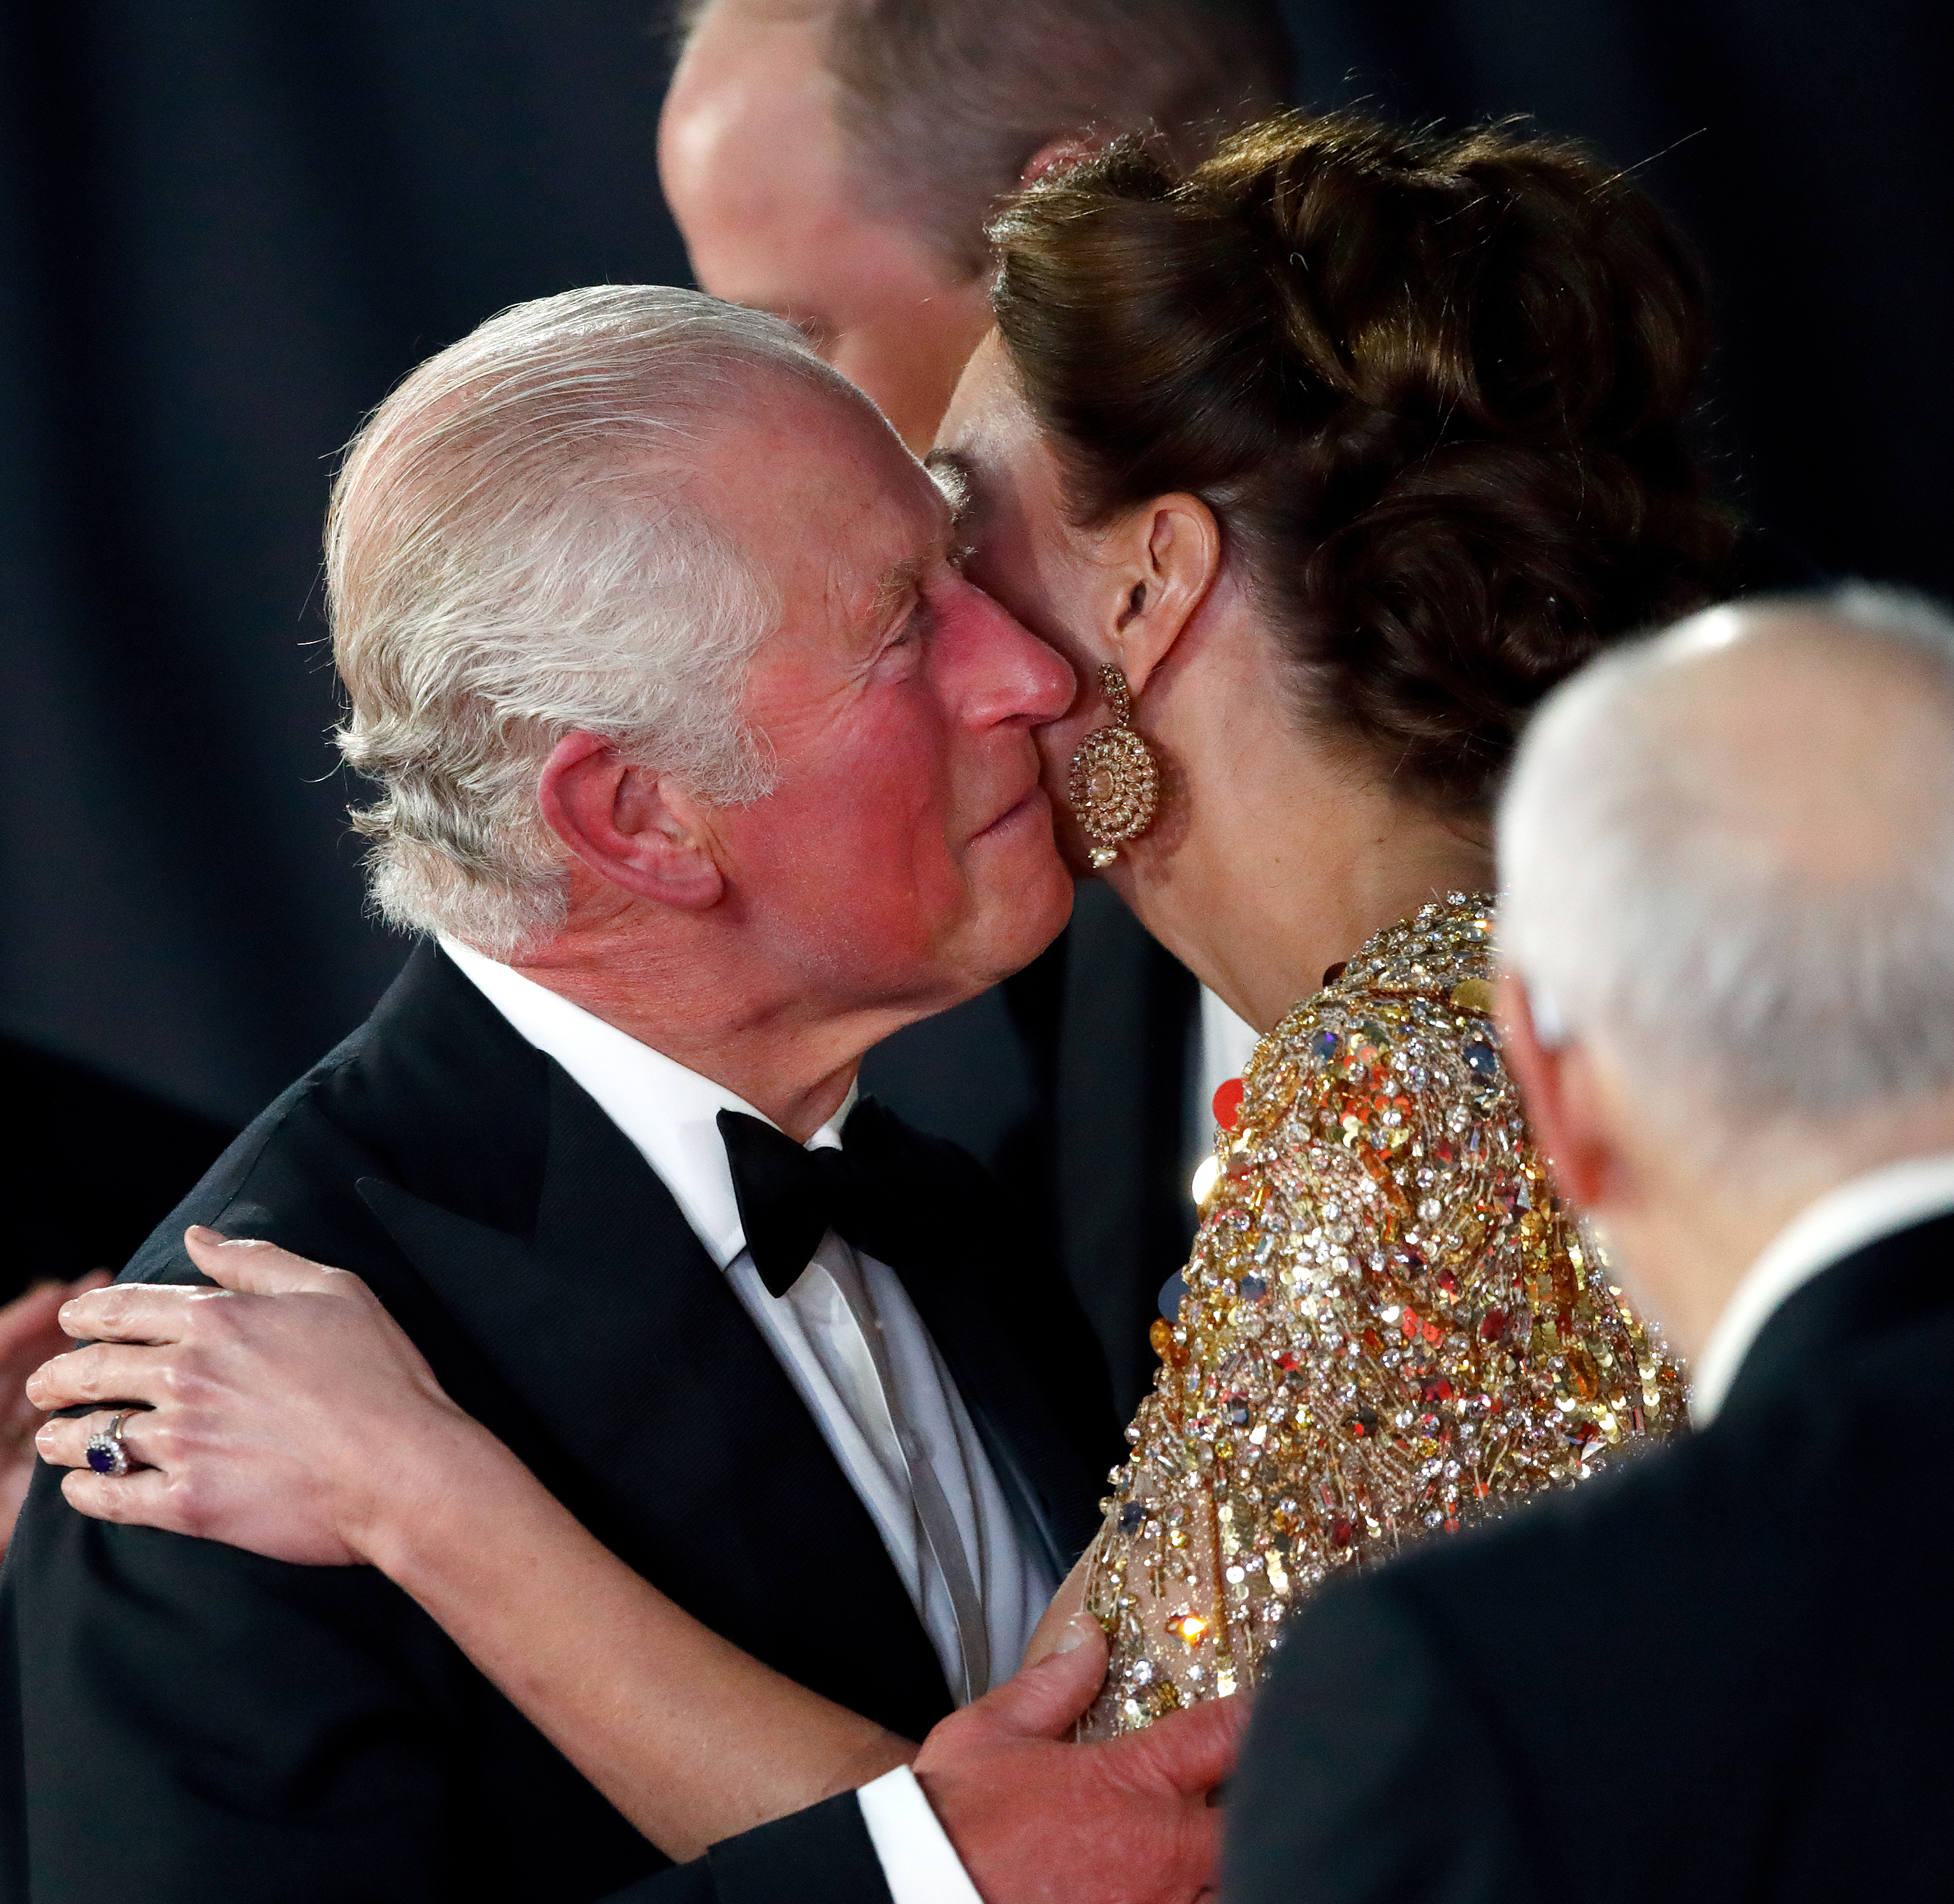 King Charles III kissing the Princess of Wales at the ""No Time To Die" World Premiere " in London in 2021 | Source: Getty Images